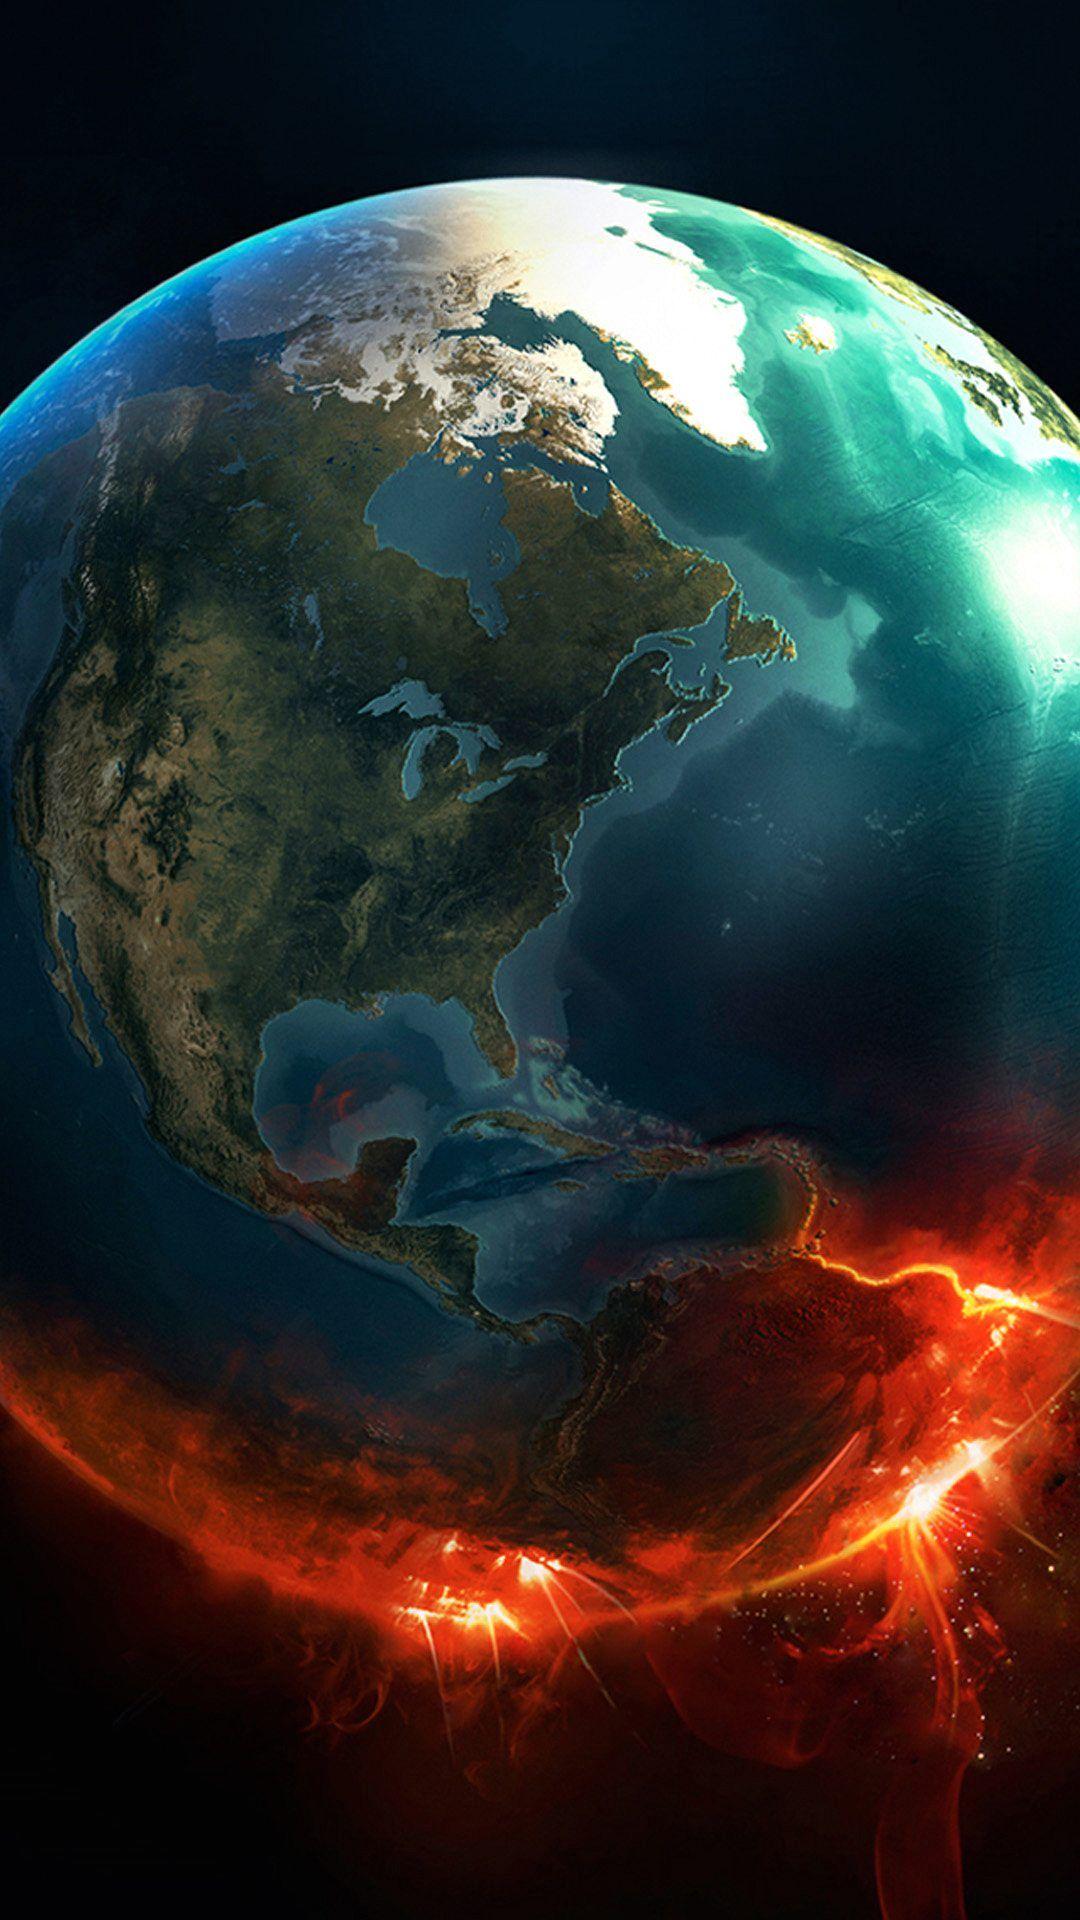 Earth Exploding 1080 x 1920 Wallpaper Vertical. file